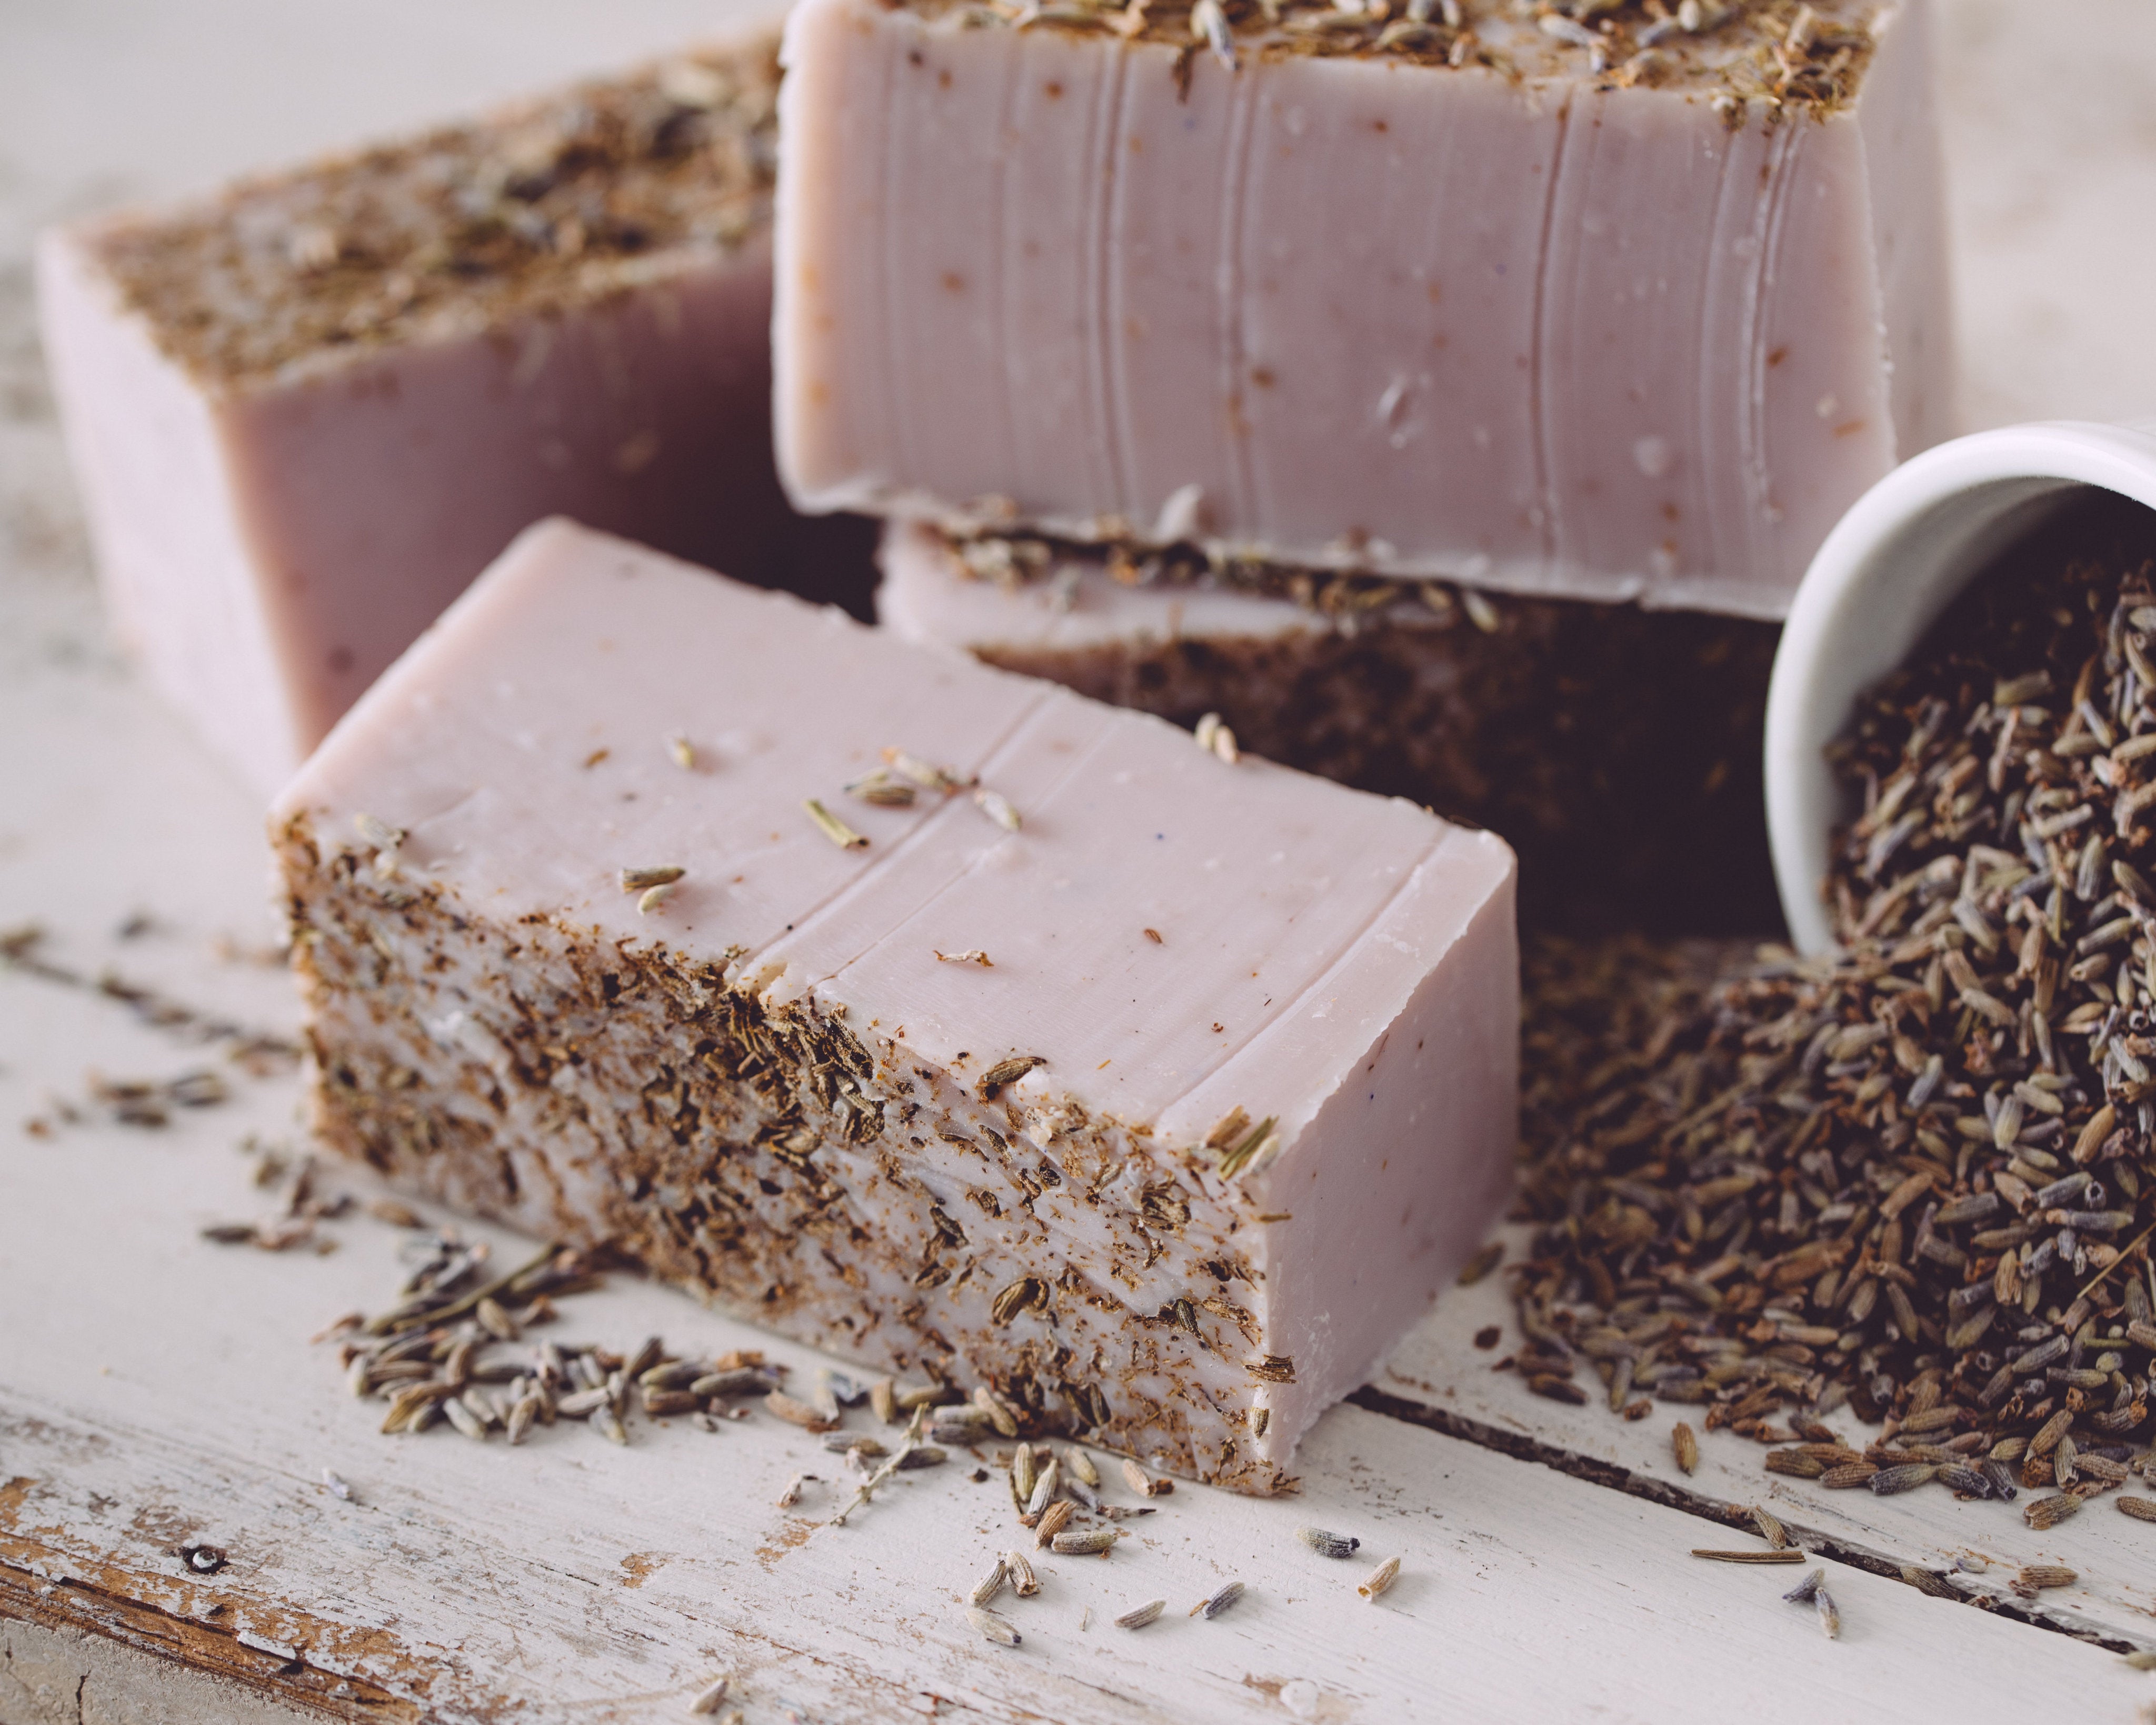 Lavender Bud Organic Handmade Soap. This Lavender Bud Organic Handmade Soap. Always made from scratch. This handmade organic lavender soap will last 8-10 weeks in the shower. We also offer our wholesale organic soaps